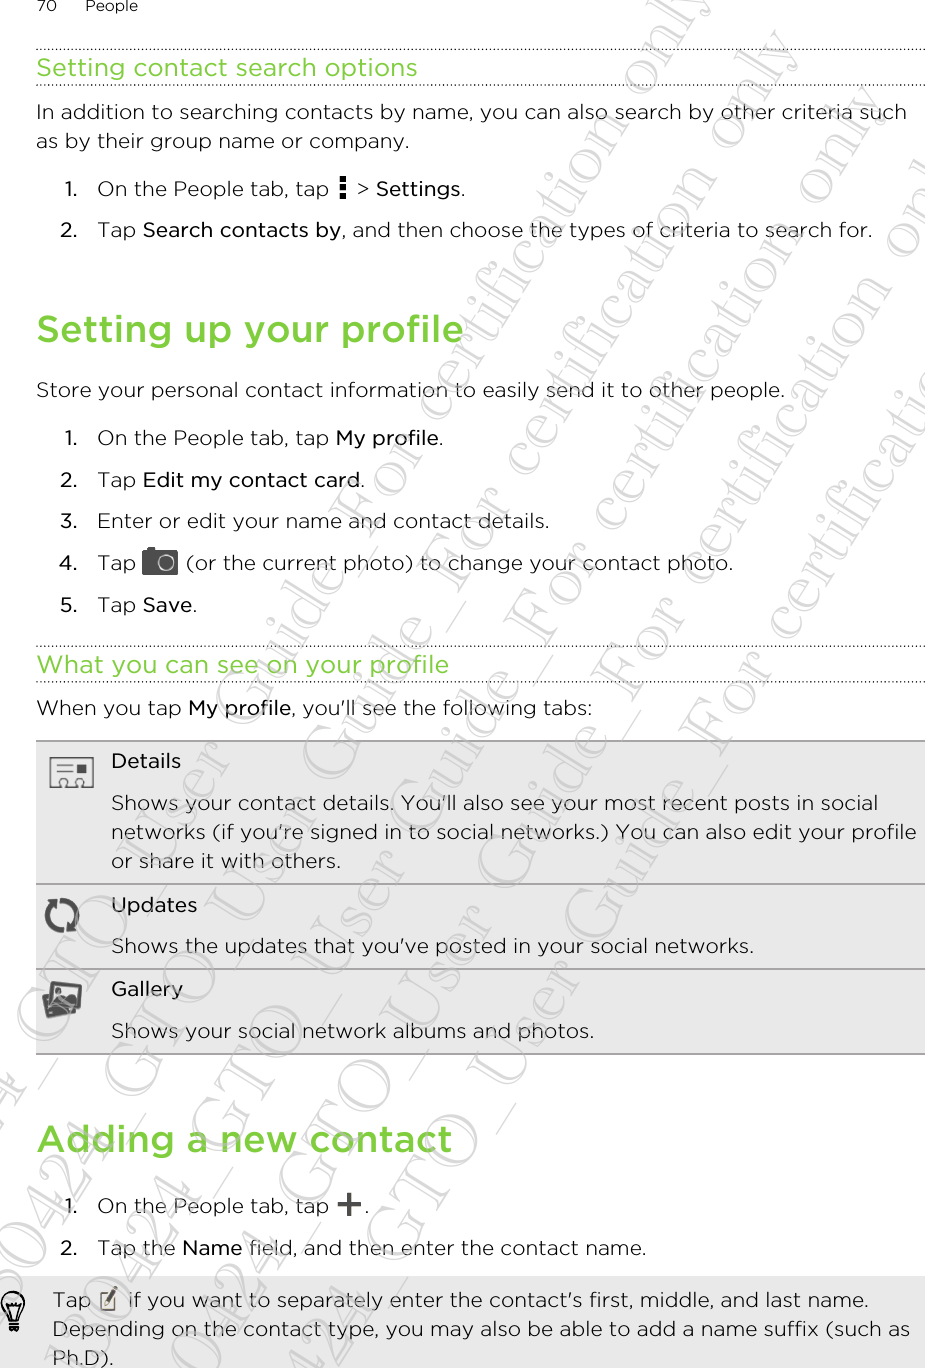 Setting contact search optionsIn addition to searching contacts by name, you can also search by other criteria suchas by their group name or company.1. On the People tab, tap   &gt; Settings.2. Tap Search contacts by, and then choose the types of criteria to search for.Setting up your profileStore your personal contact information to easily send it to other people.1. On the People tab, tap My profile.2. Tap Edit my contact card.3. Enter or edit your name and contact details.4. Tap   (or the current photo) to change your contact photo.5. Tap Save.What you can see on your profileWhen you tap My profile, you&apos;ll see the following tabs:DetailsShows your contact details. You&apos;ll also see your most recent posts in socialnetworks (if you&apos;re signed in to social networks.) You can also edit your profileor share it with others.UpdatesShows the updates that you&apos;ve posted in your social networks.GalleryShows your social network albums and photos.Adding a new contact1. On the People tab, tap  .2. Tap the Name field, and then enter the contact name. Tap   if you want to separately enter the contact&apos;s first, middle, and last name.Depending on the contact type, you may also be able to add a name suffix (such asPh.D).70 People20130424_GTO_User Guide_For certification only 20130424_GTO_User Guide_For certification only 20130424_GTO_User Guide_For certification only 20130424_GTO_User Guide_For certification only 20130424_GTO_User Guide_For certification only